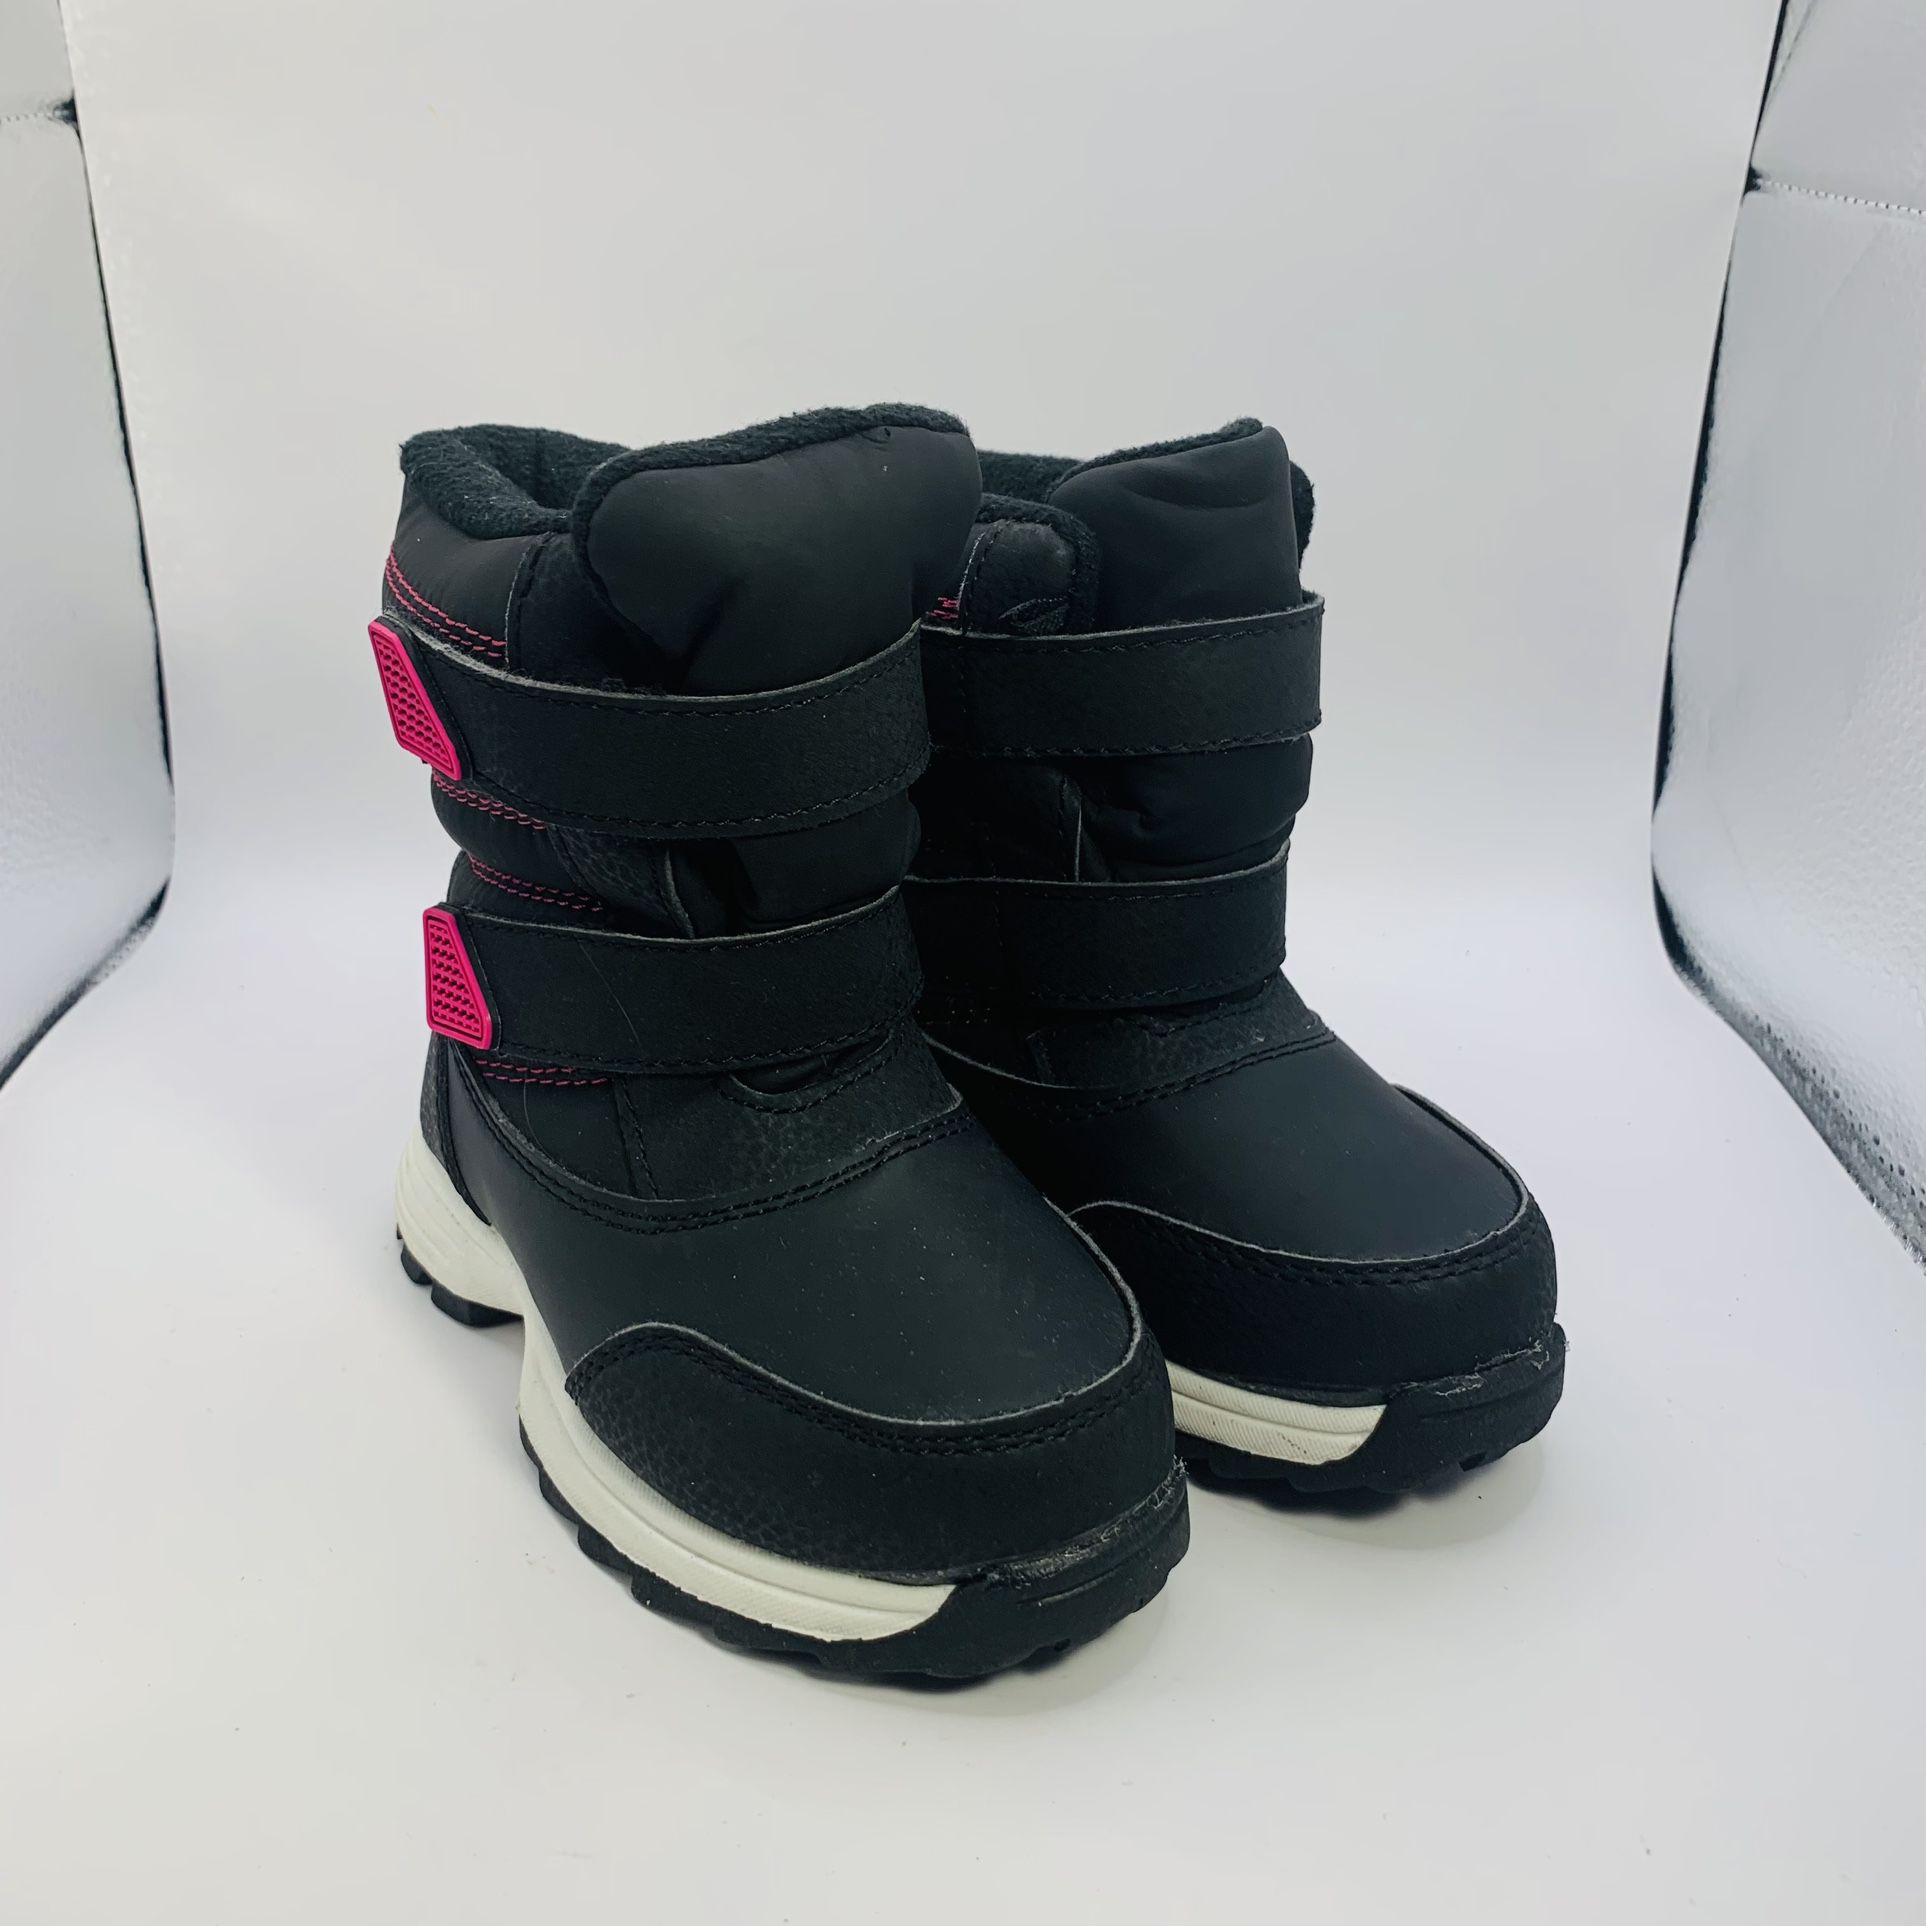 WONDER NATION Toddler Girls Snow Boots. Size 8. Black with pink.